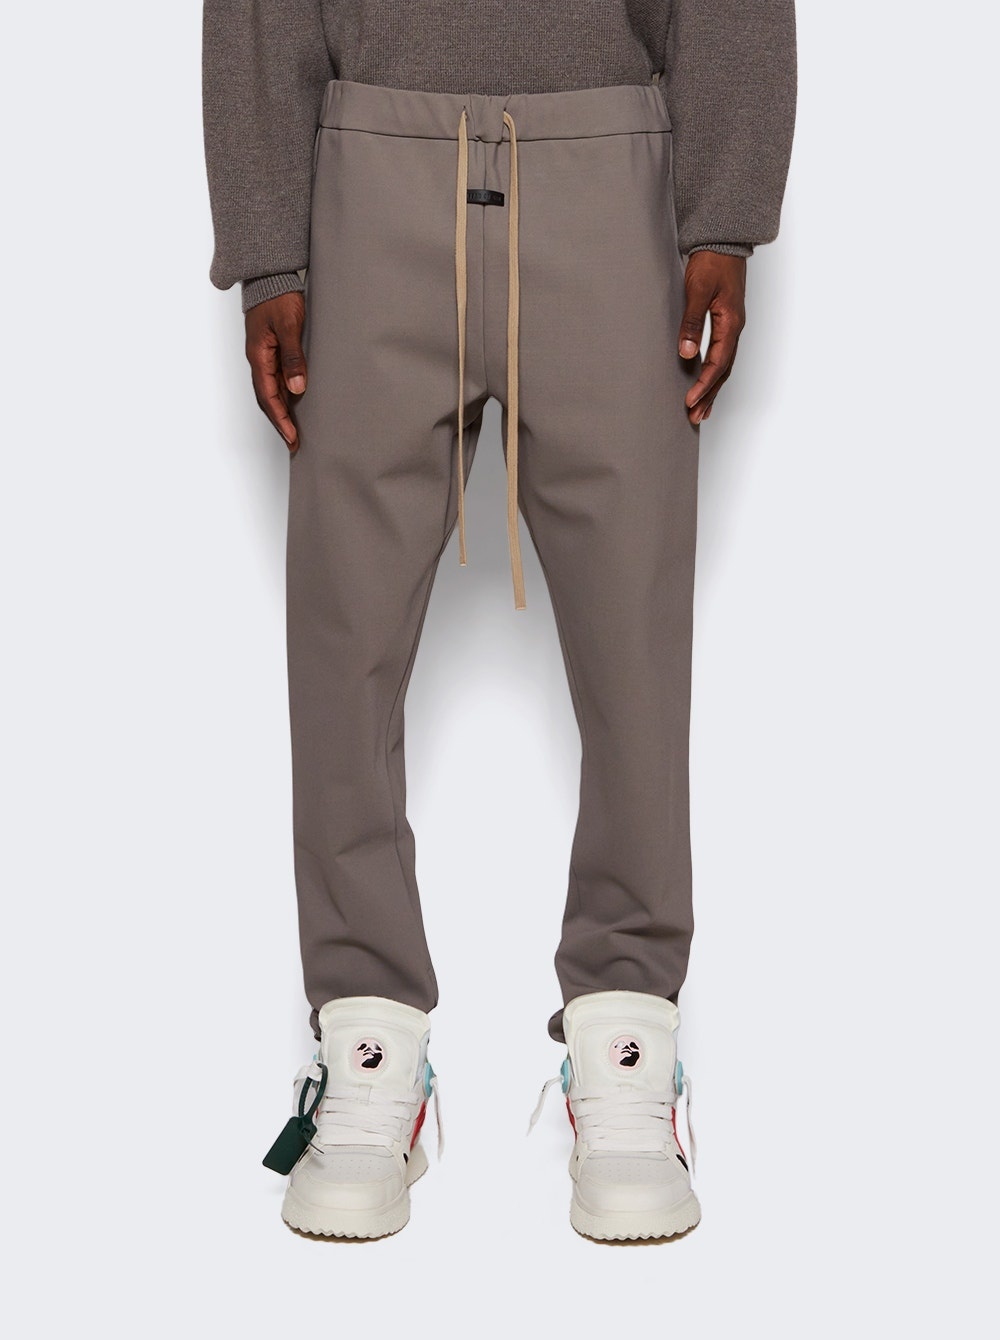 Fear of God Eternal Viscose Tricot Slim Pants Dusty Concrete Grey |  thewebster | REVERSIBLE